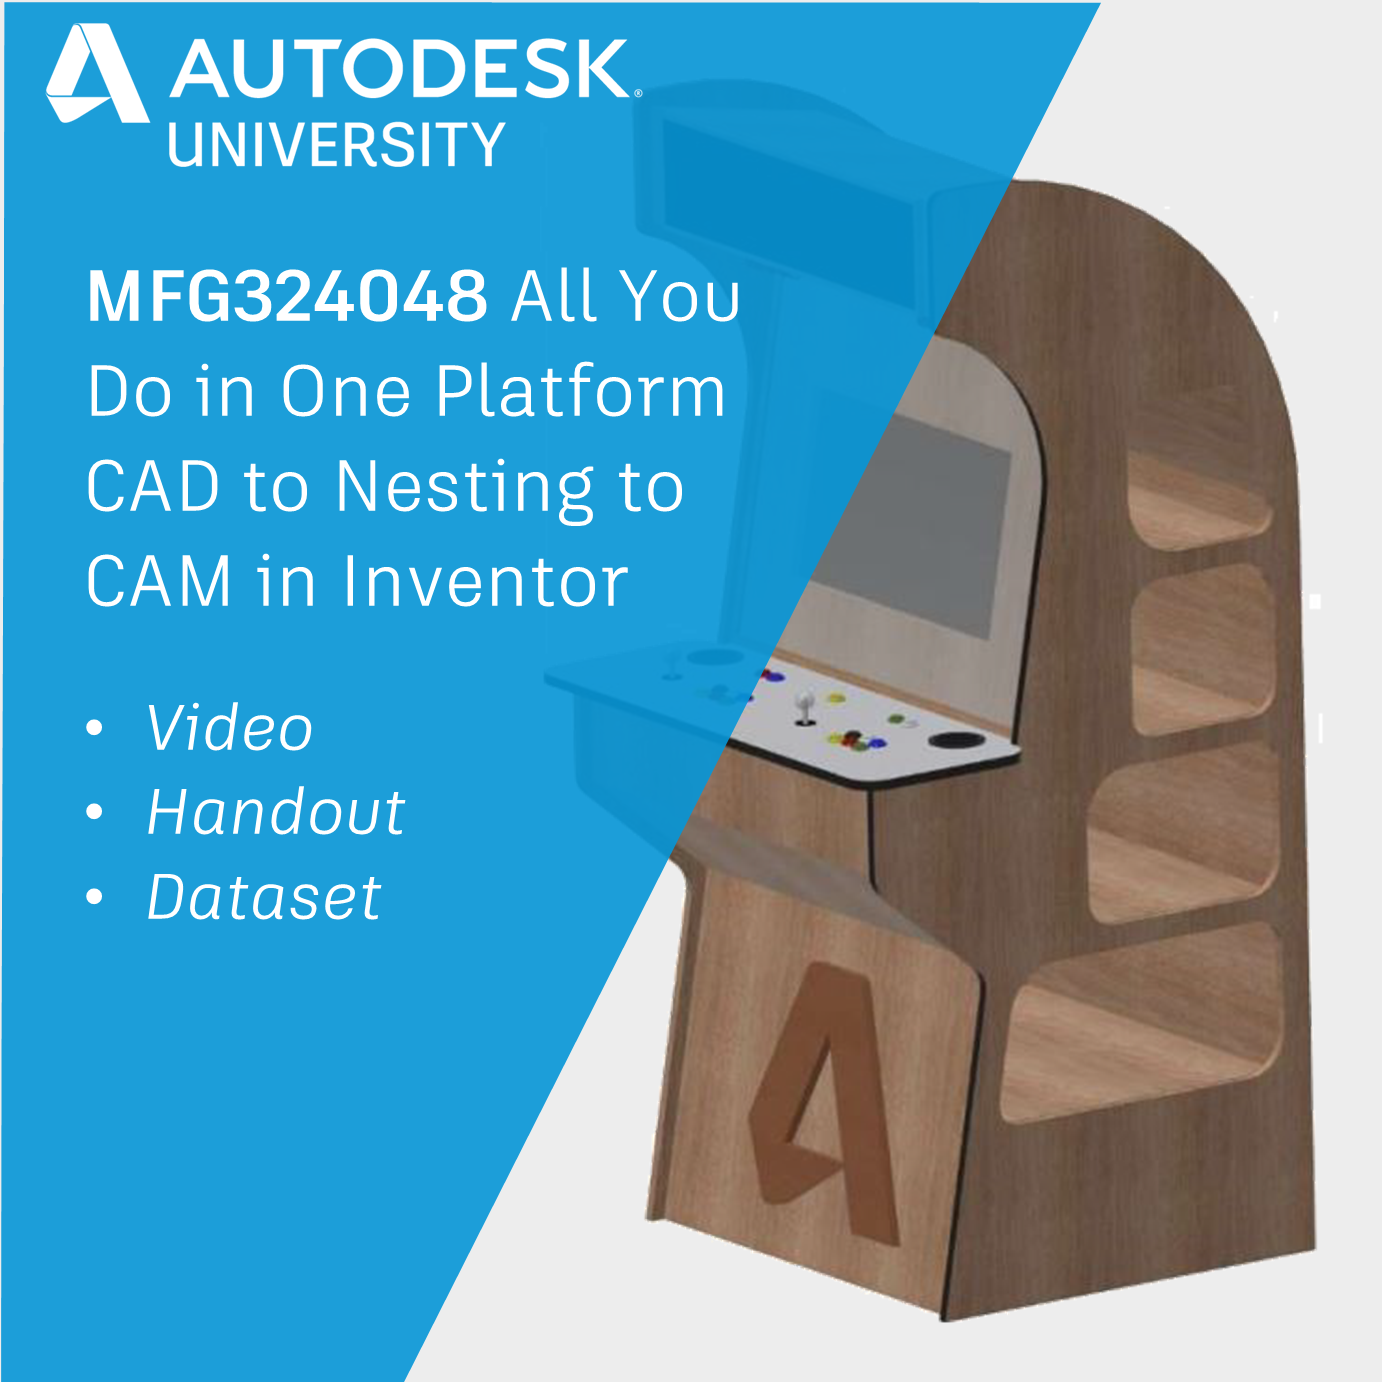 MFG324048 All You Do in One Platform—CAD to Nesting to CAM in Inventor